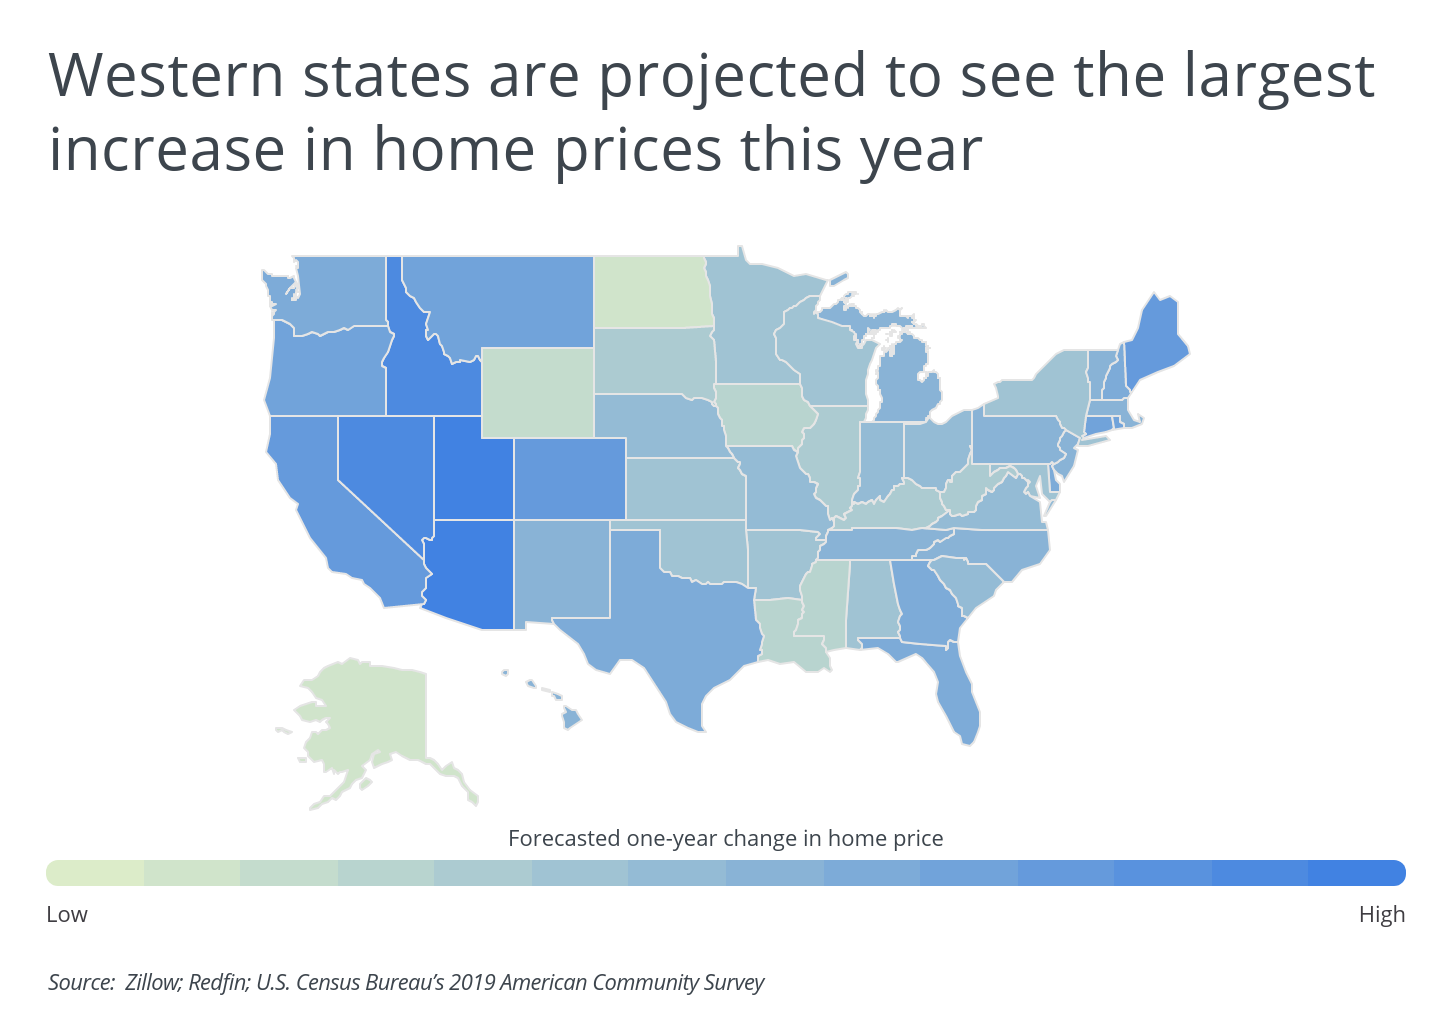 Western states are projected to see the largest increase in home prices this year